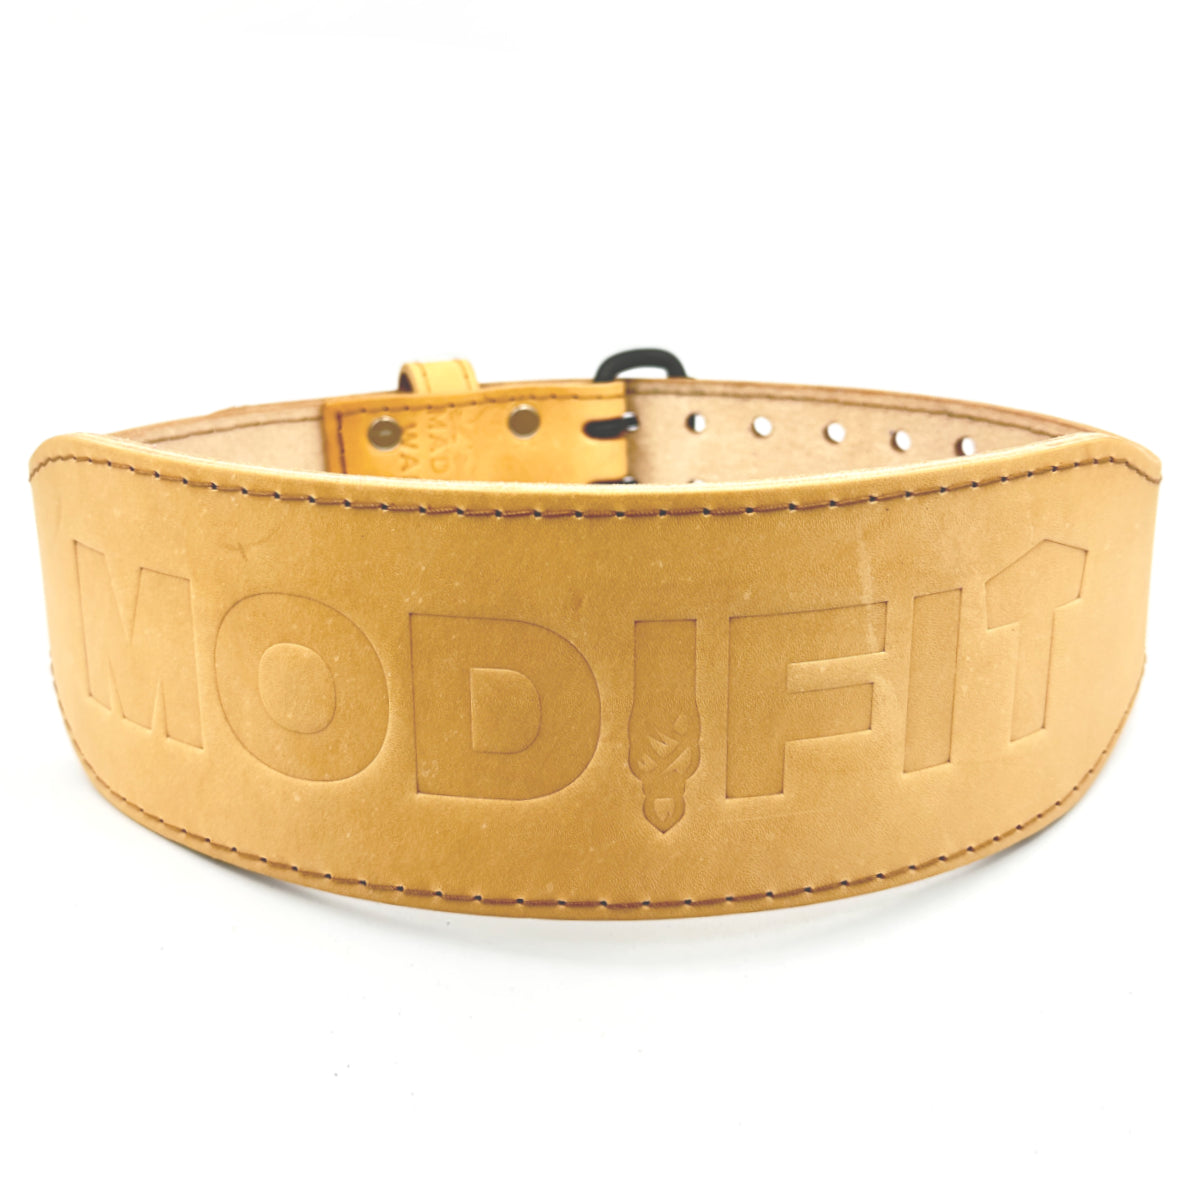 ModiFit Retro Weightlifting Belt Hand Made in UK